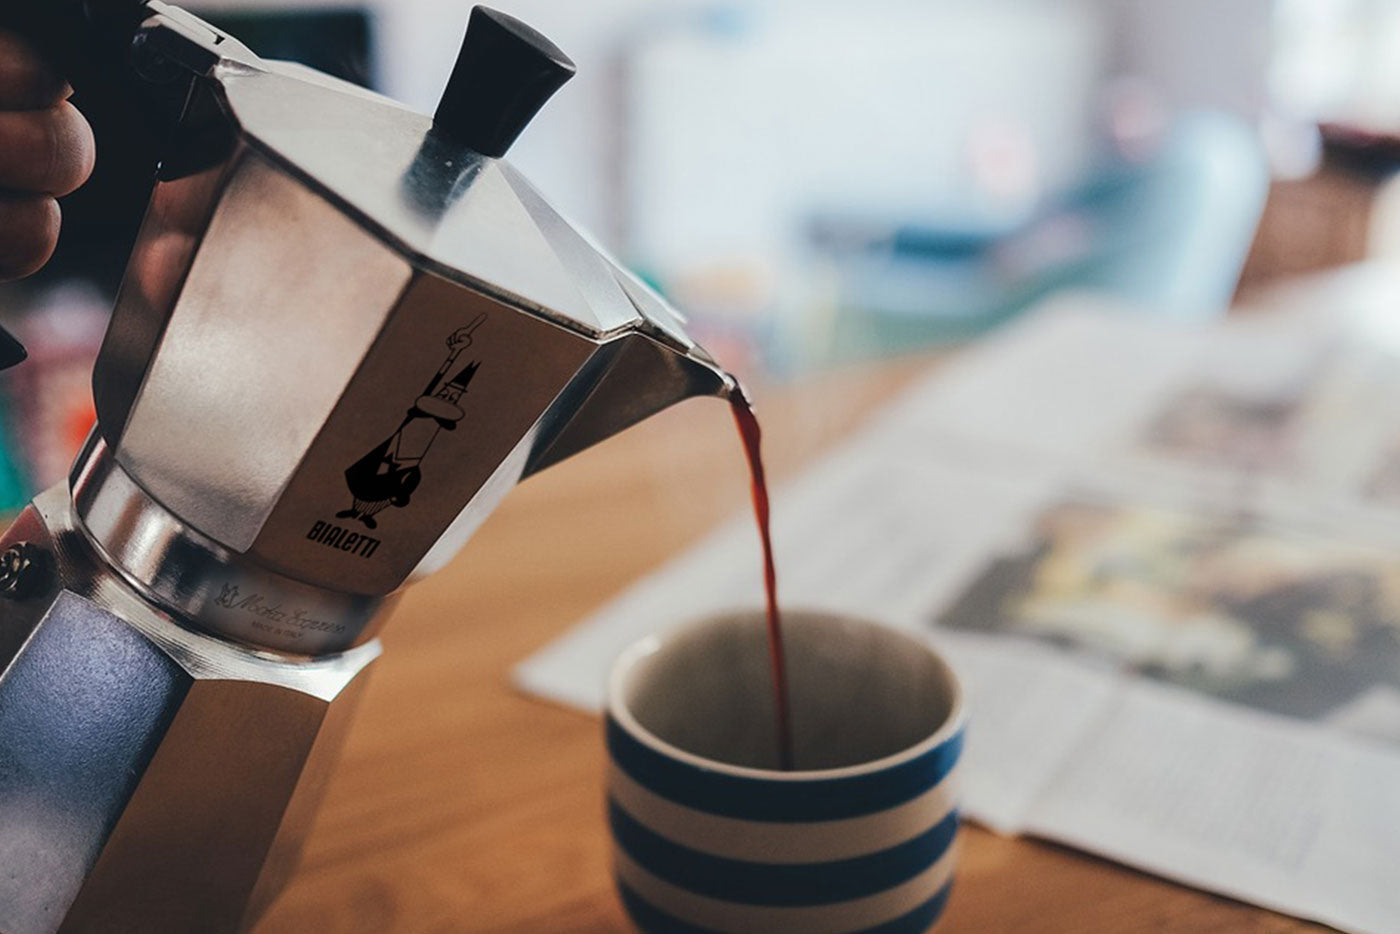 How to Make Stovetop Espresso Coffee at Home in a Moka Pot